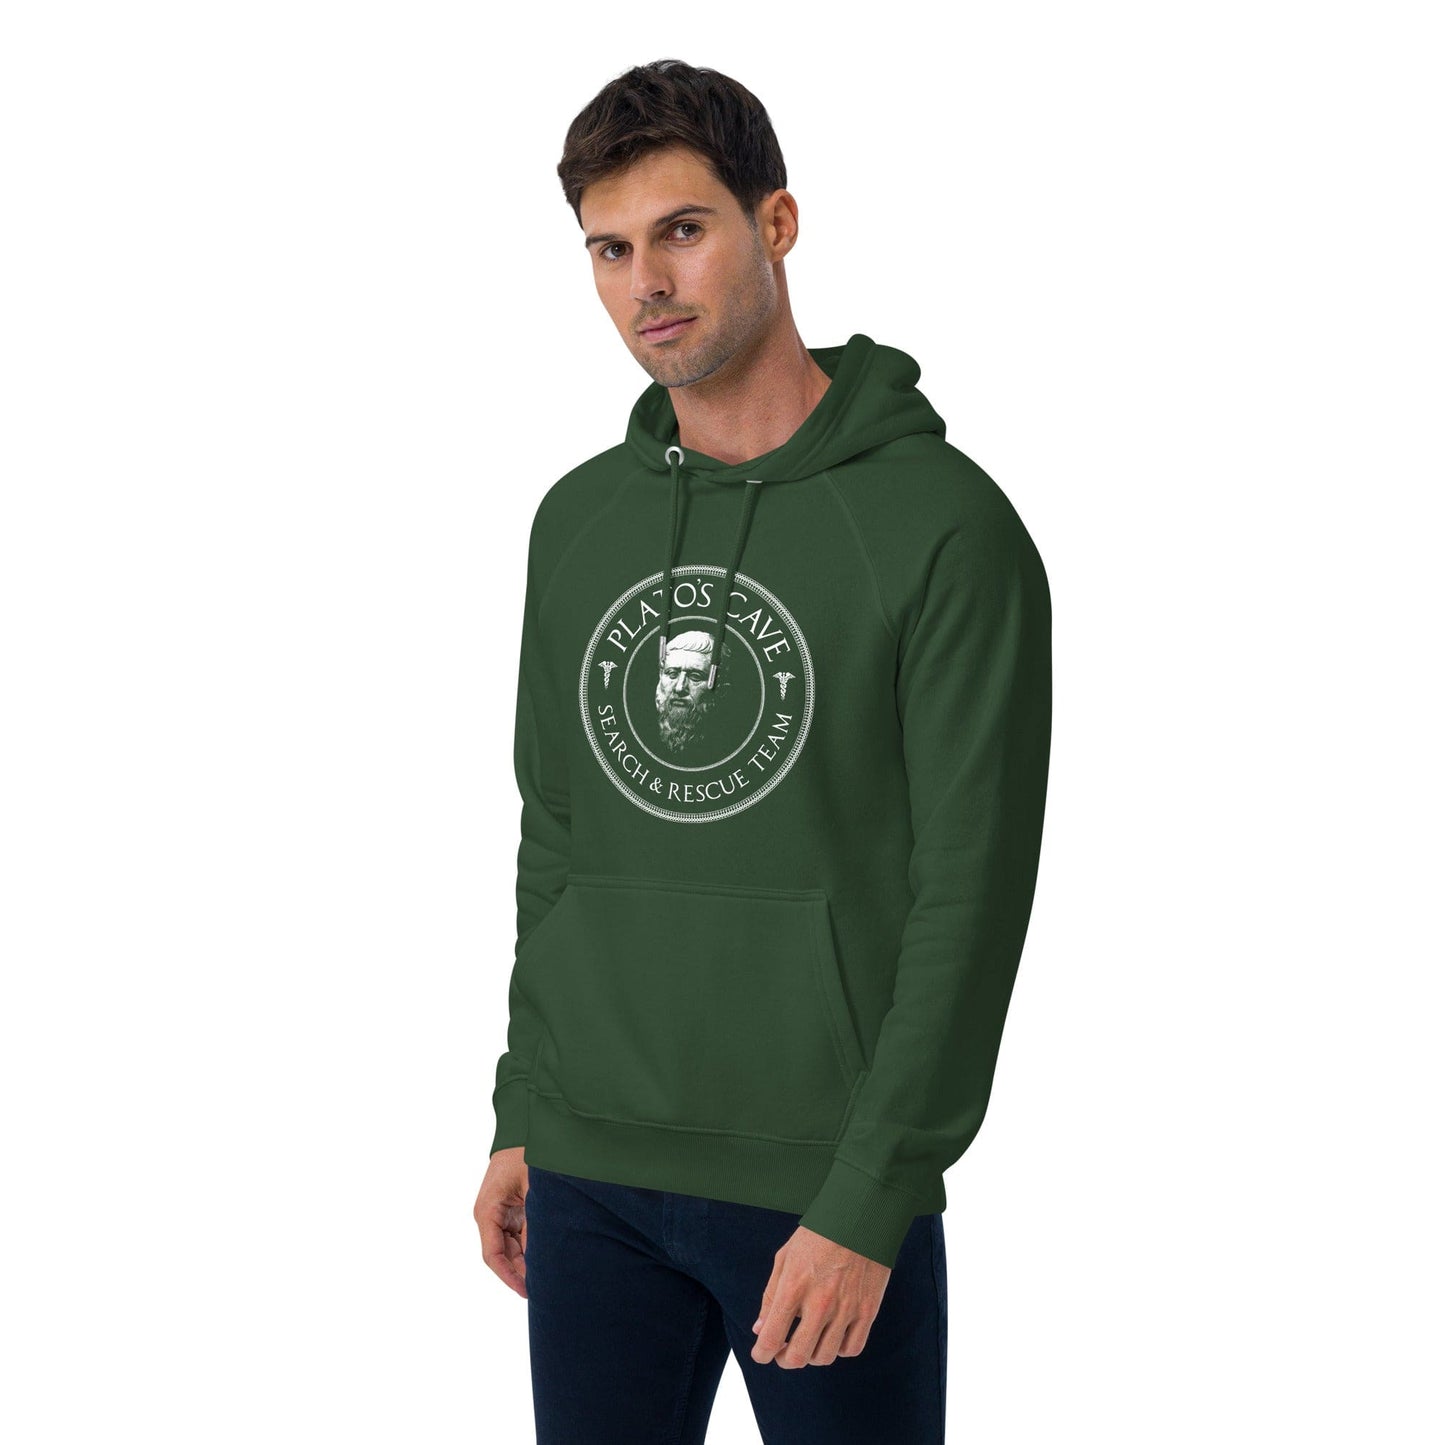 Plato's Cave Search and Rescue Team - Eco Hoodie